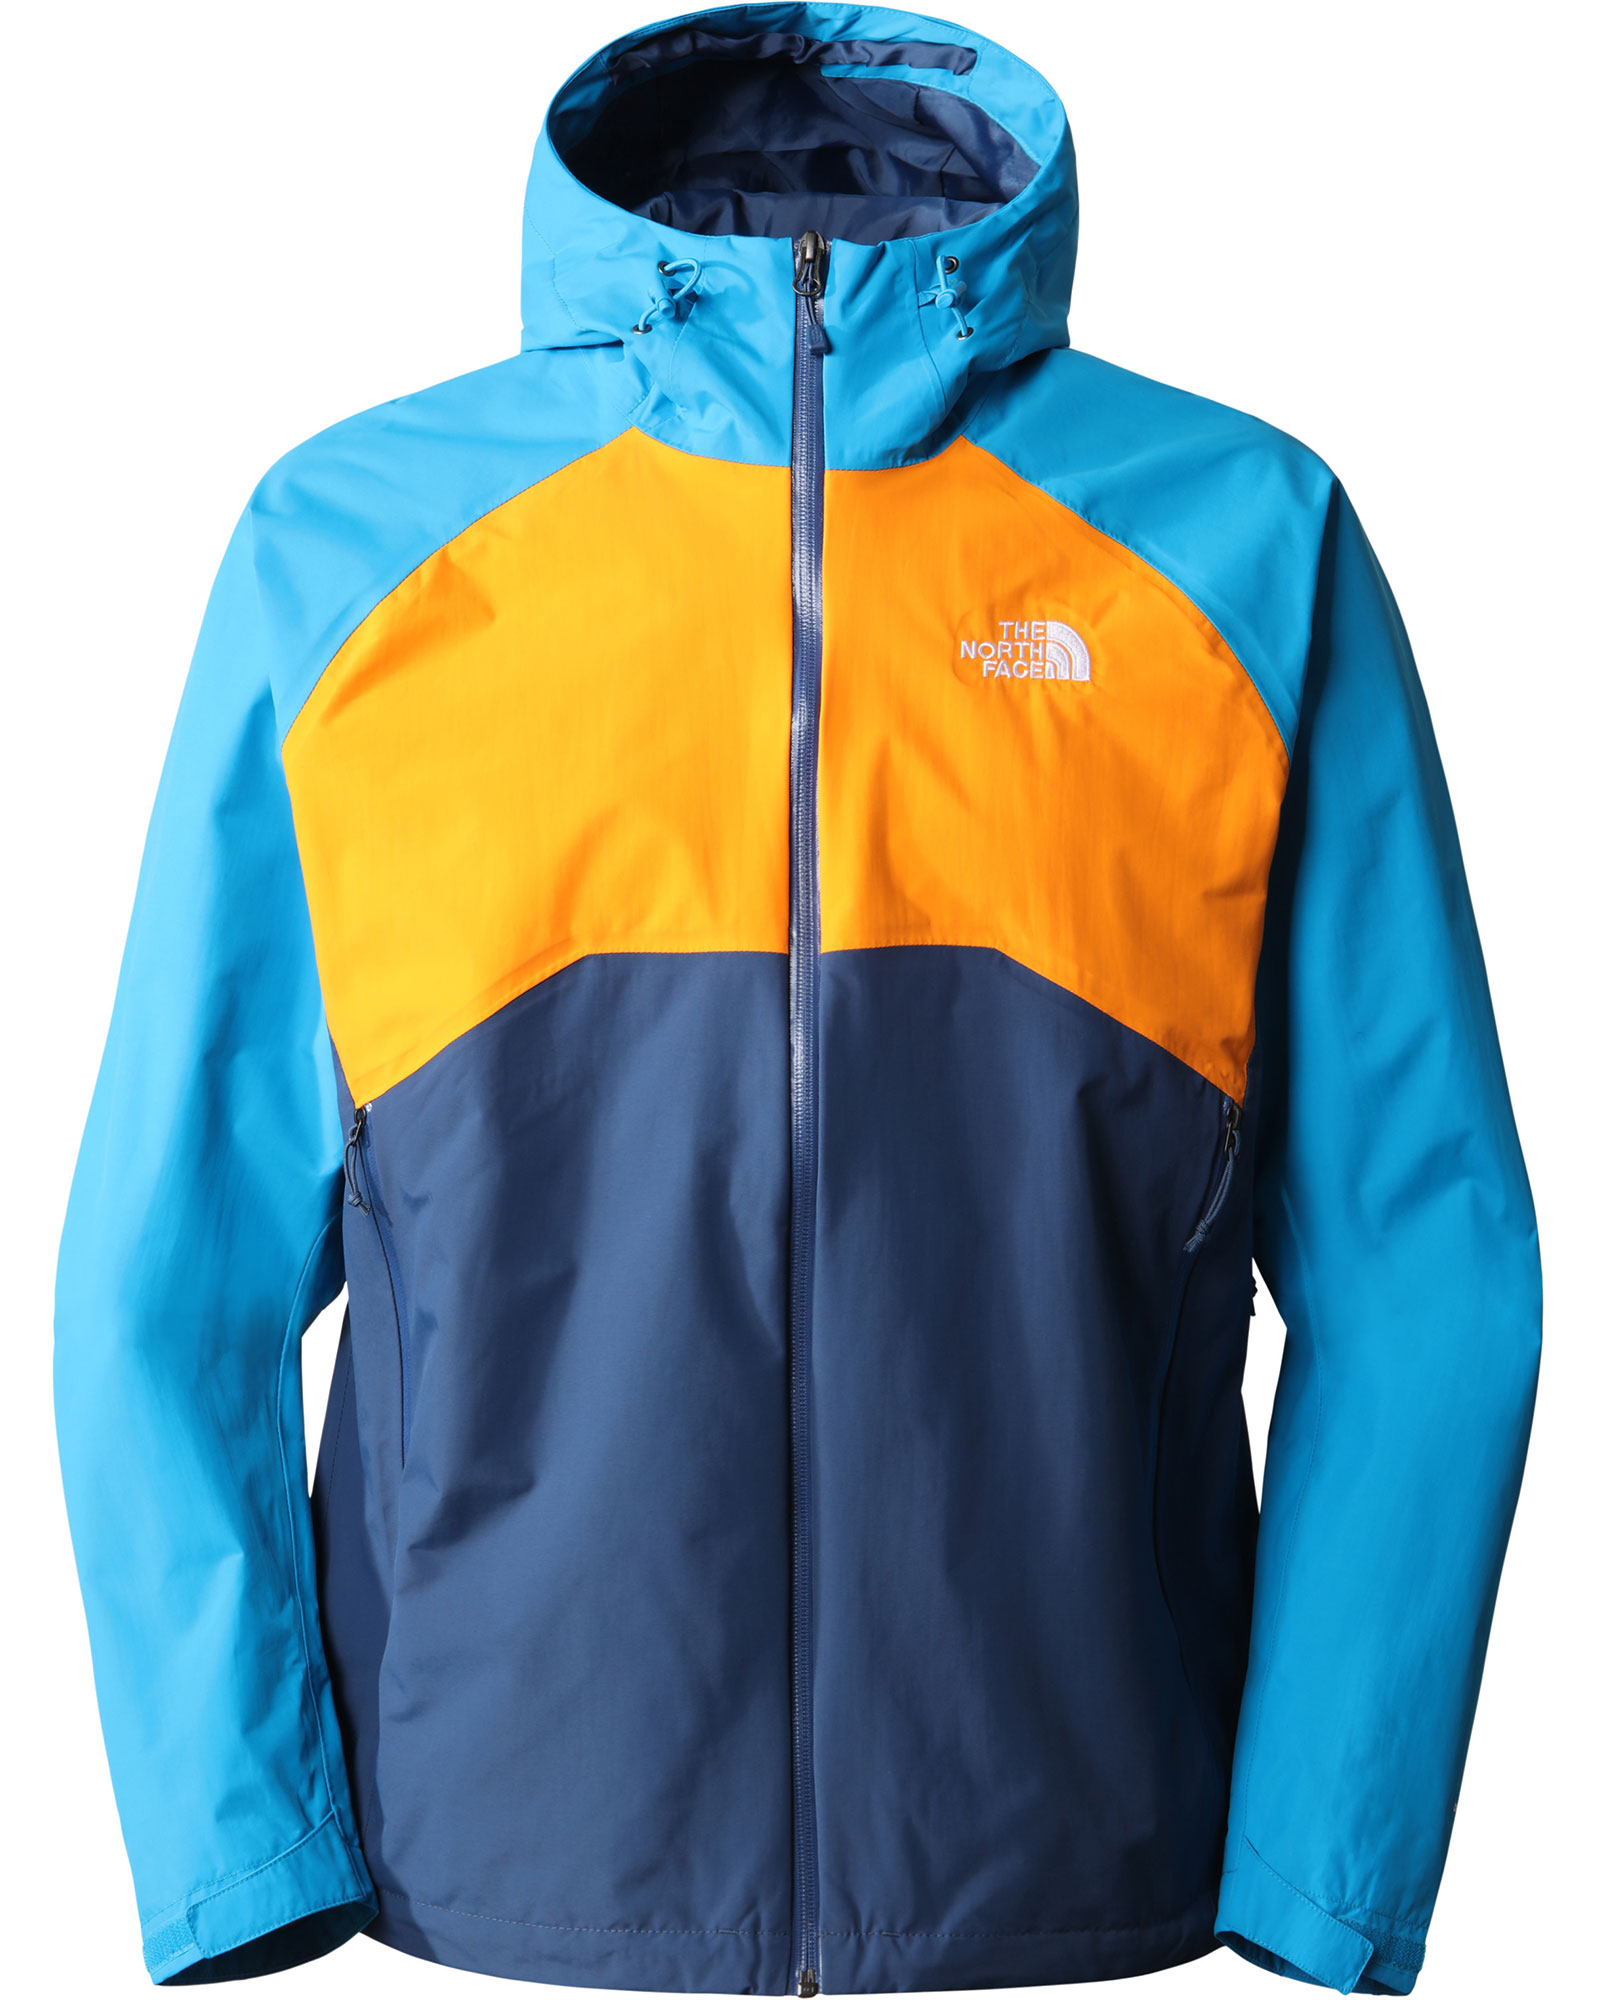 The North Face Stratos DryVent Men’s Jacket - Shady Blue/Cone Orange M